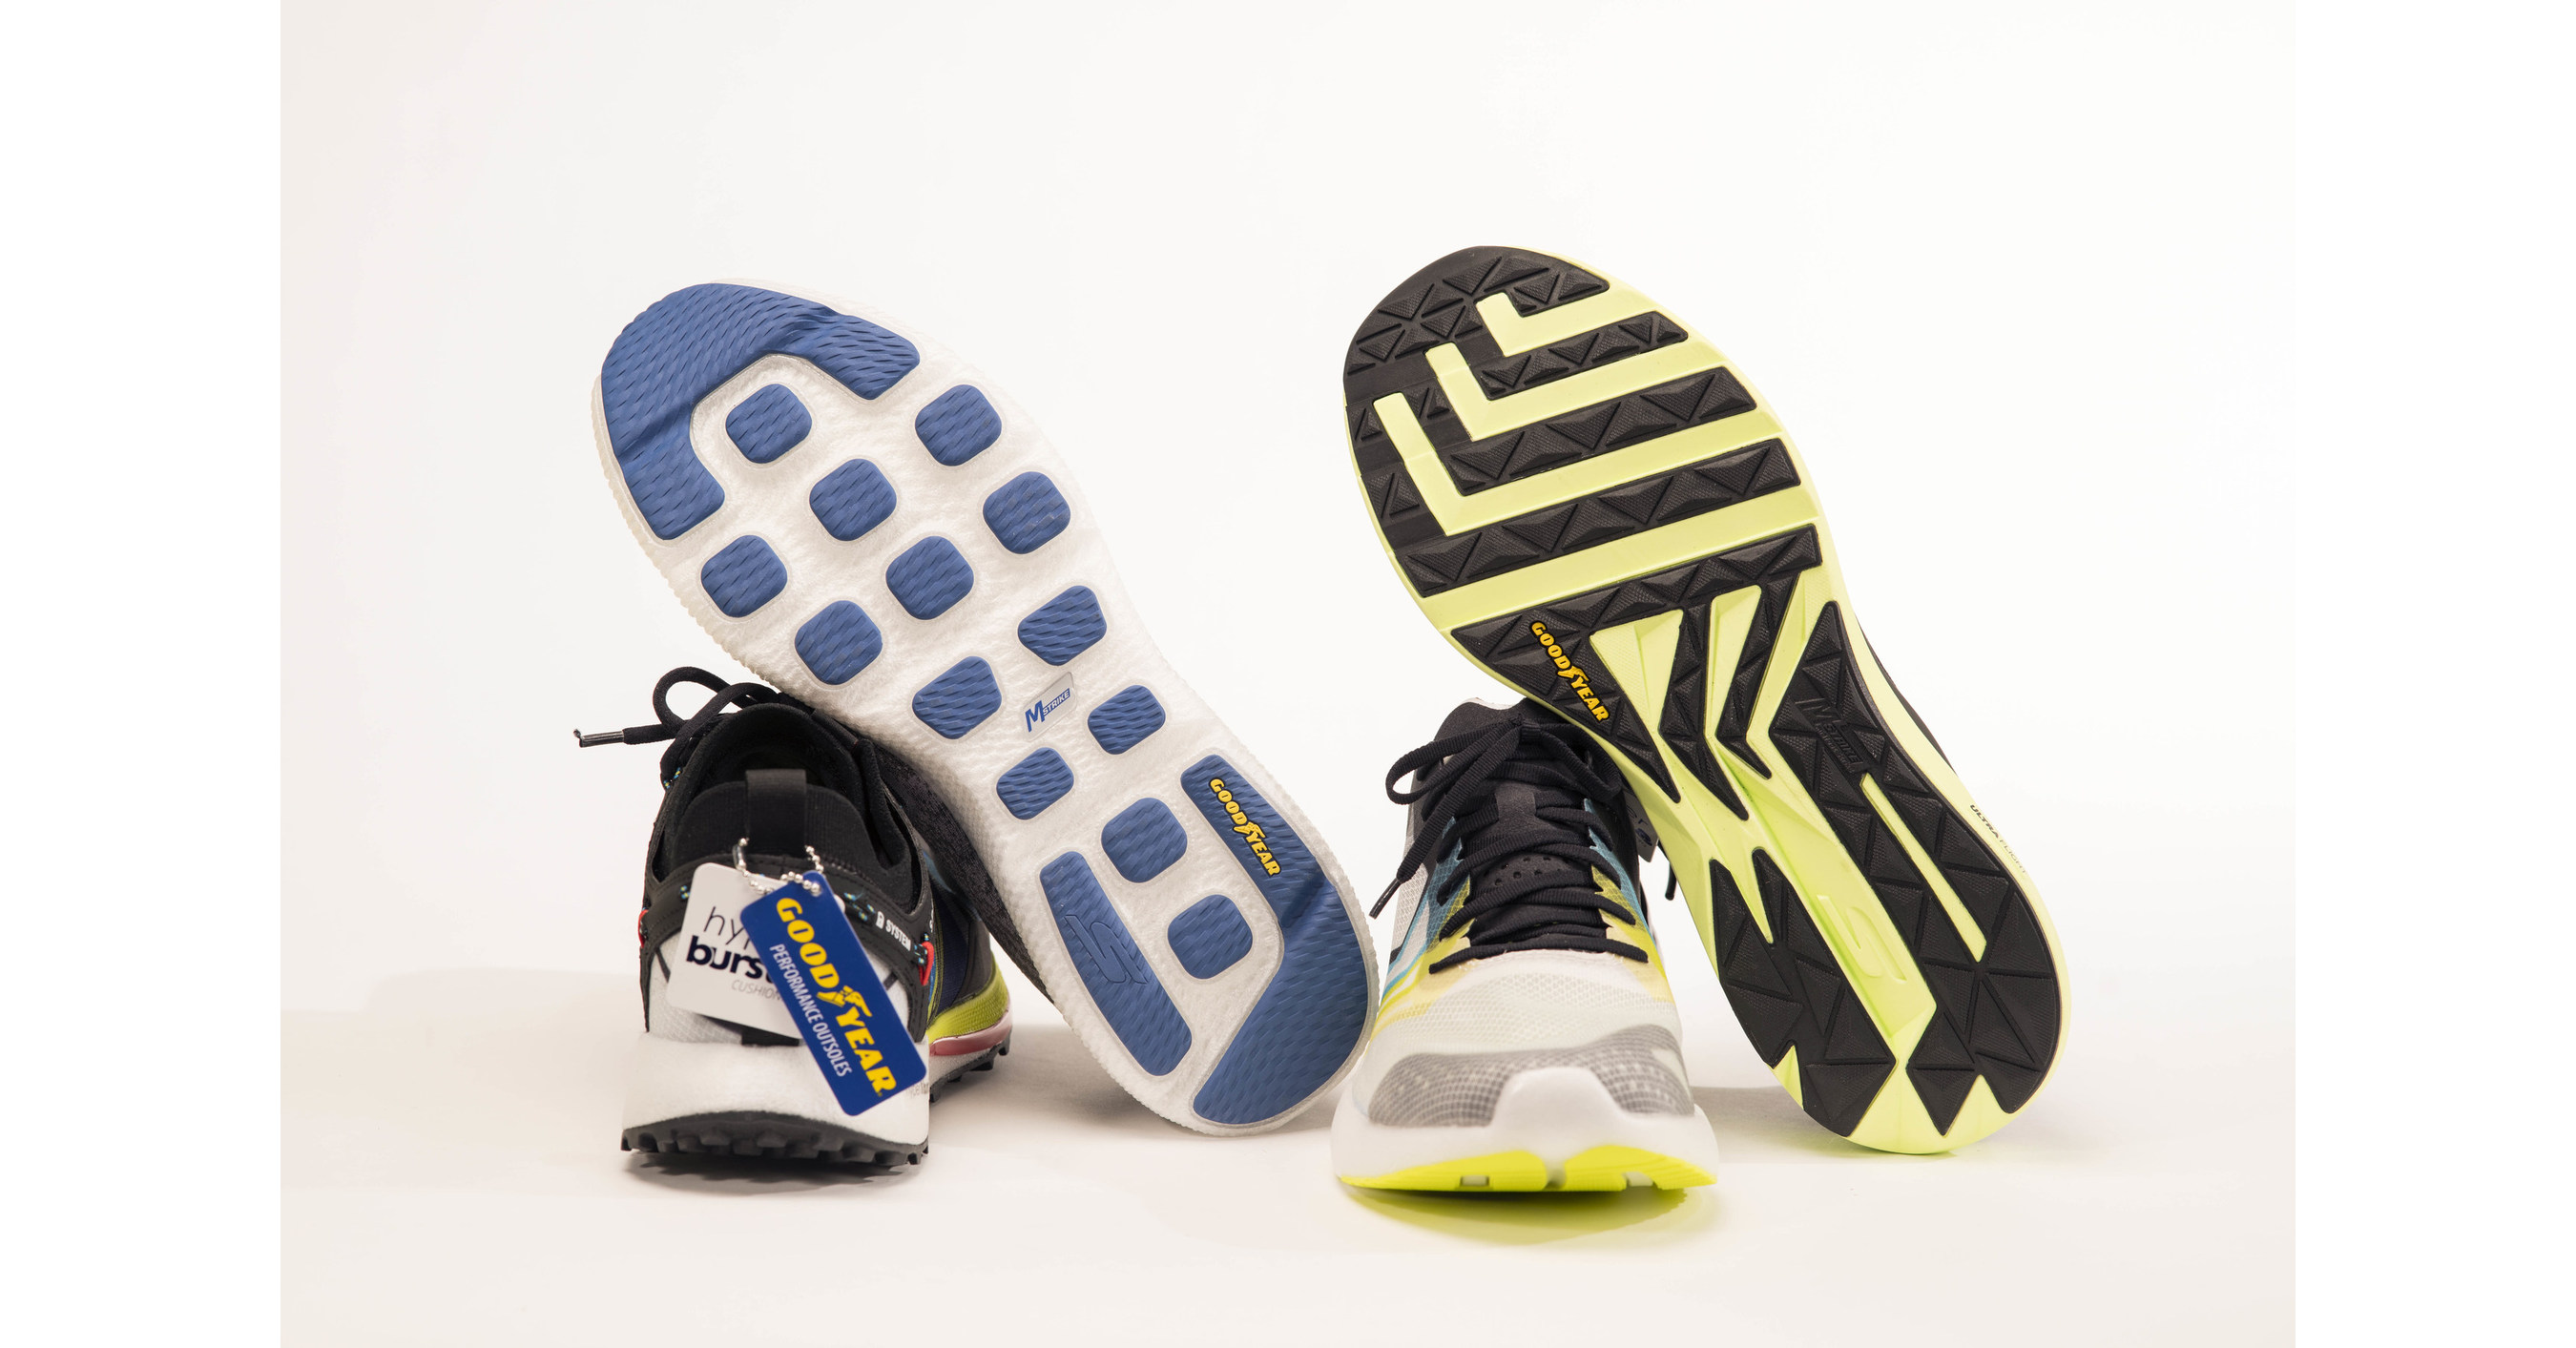 Skechers Collaborates with Goodyear on Footwear